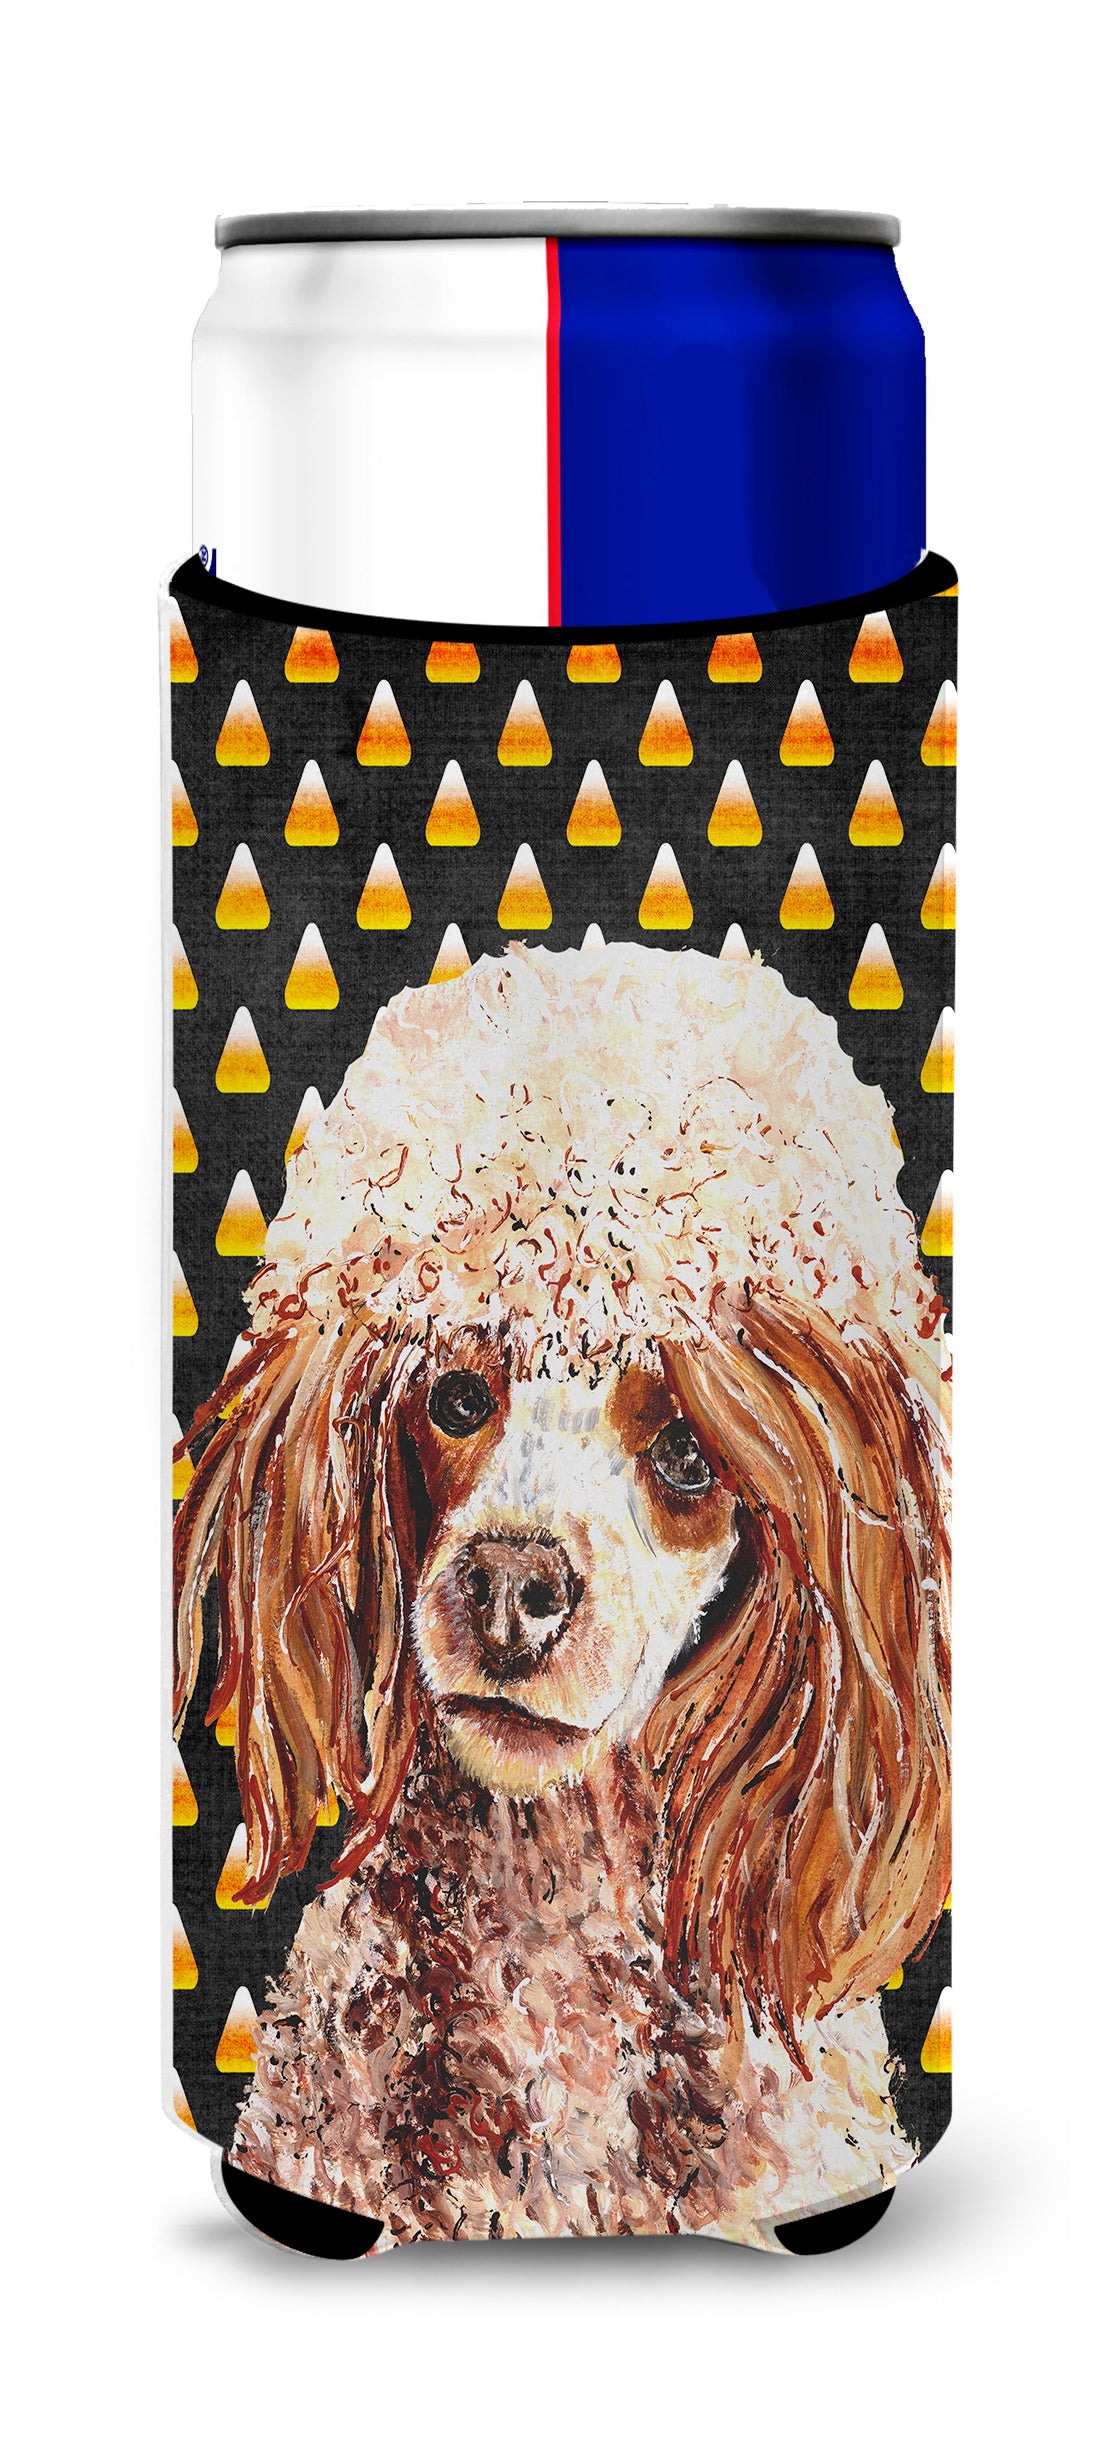 Red Miniature Poodle Candy Corn Halloween Ultra Beverage Insulators for slim cans SC9651MUK.